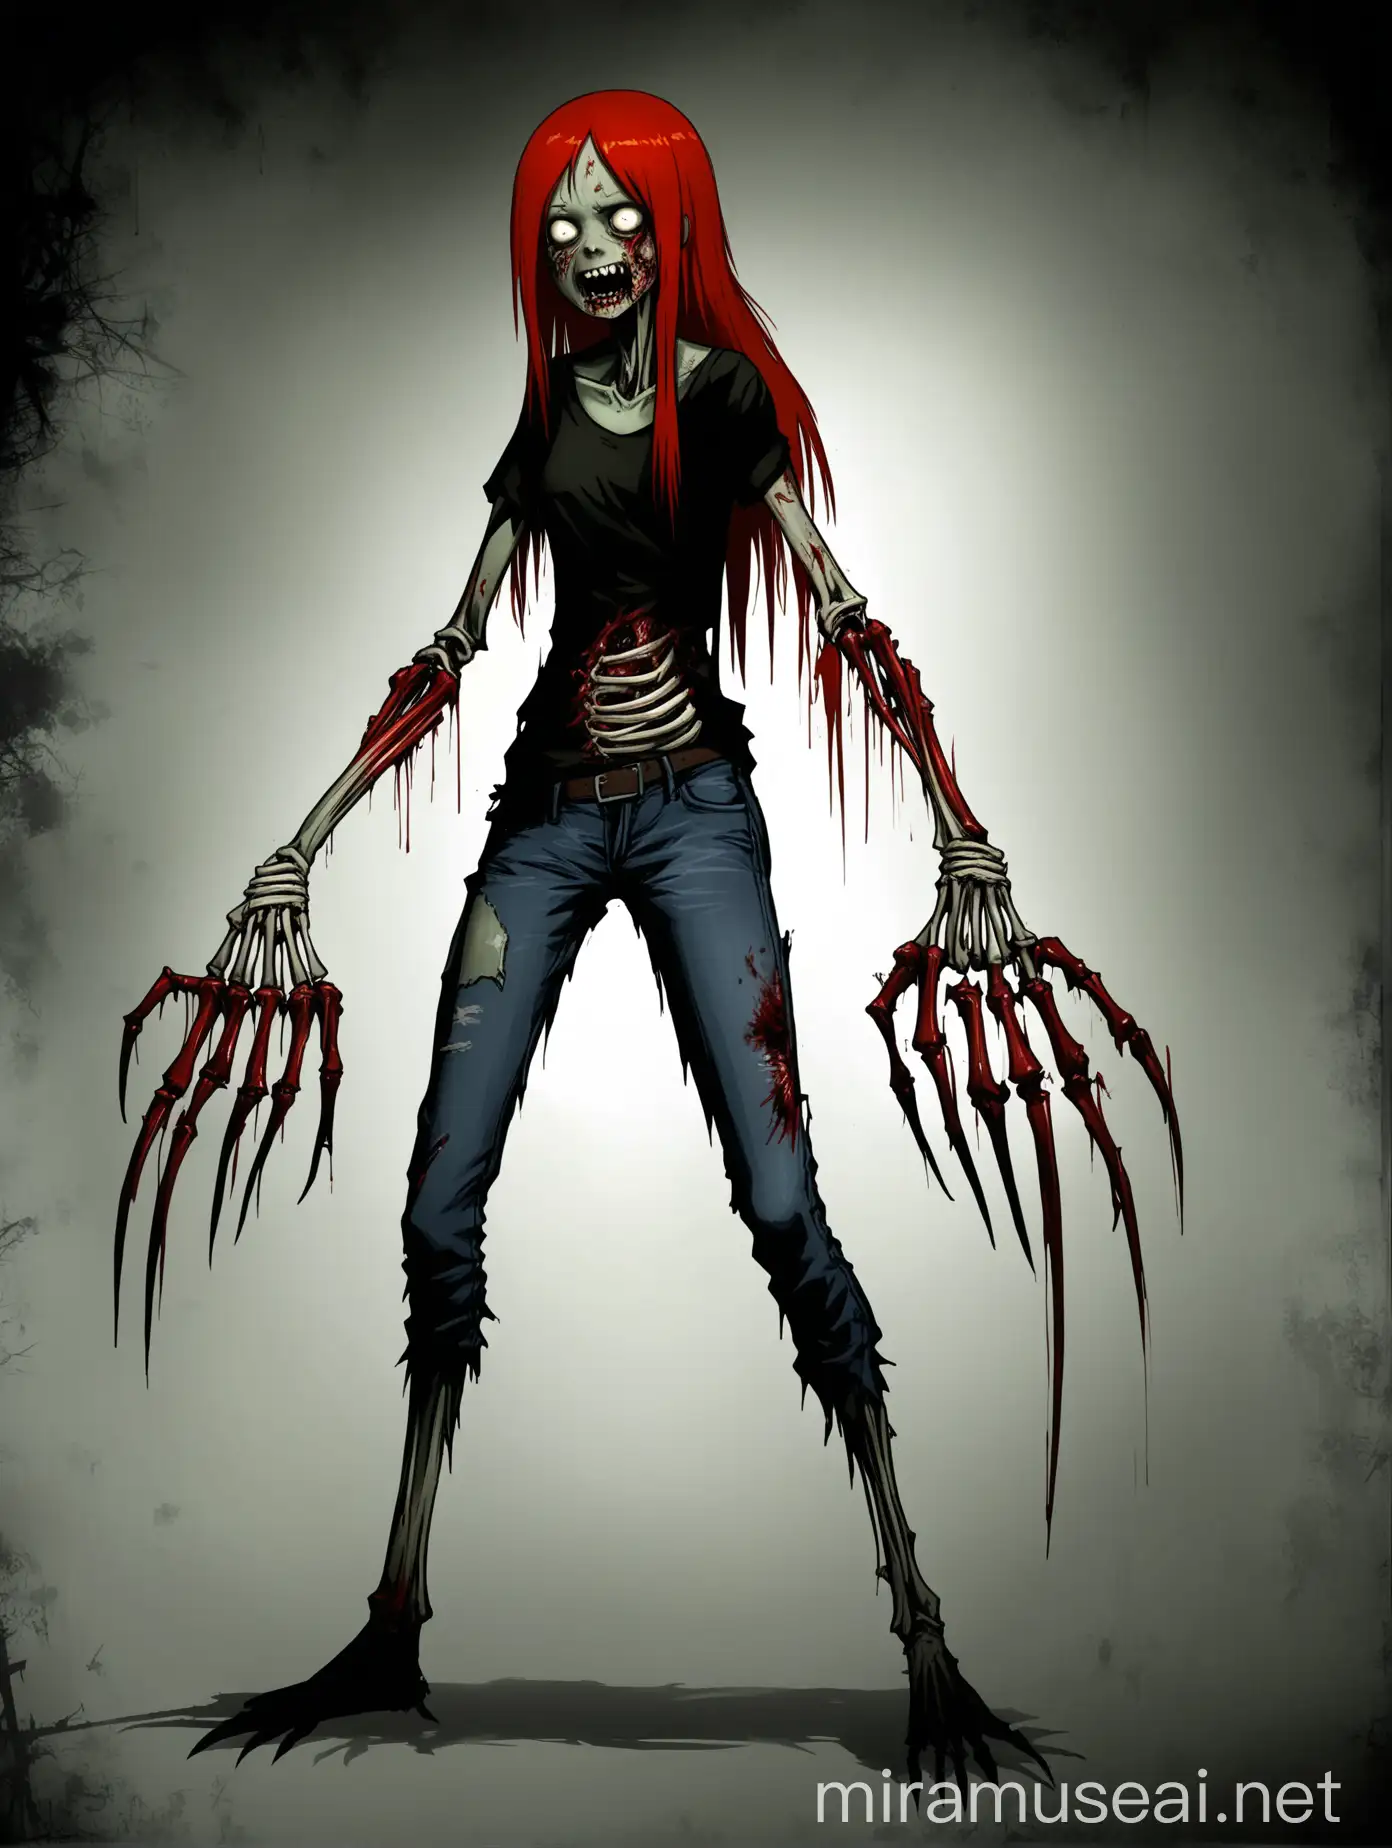 Sinister Special Infected Zombie Girl Concept Art RedHaired Monstrosity with Claws and Multiple Arms